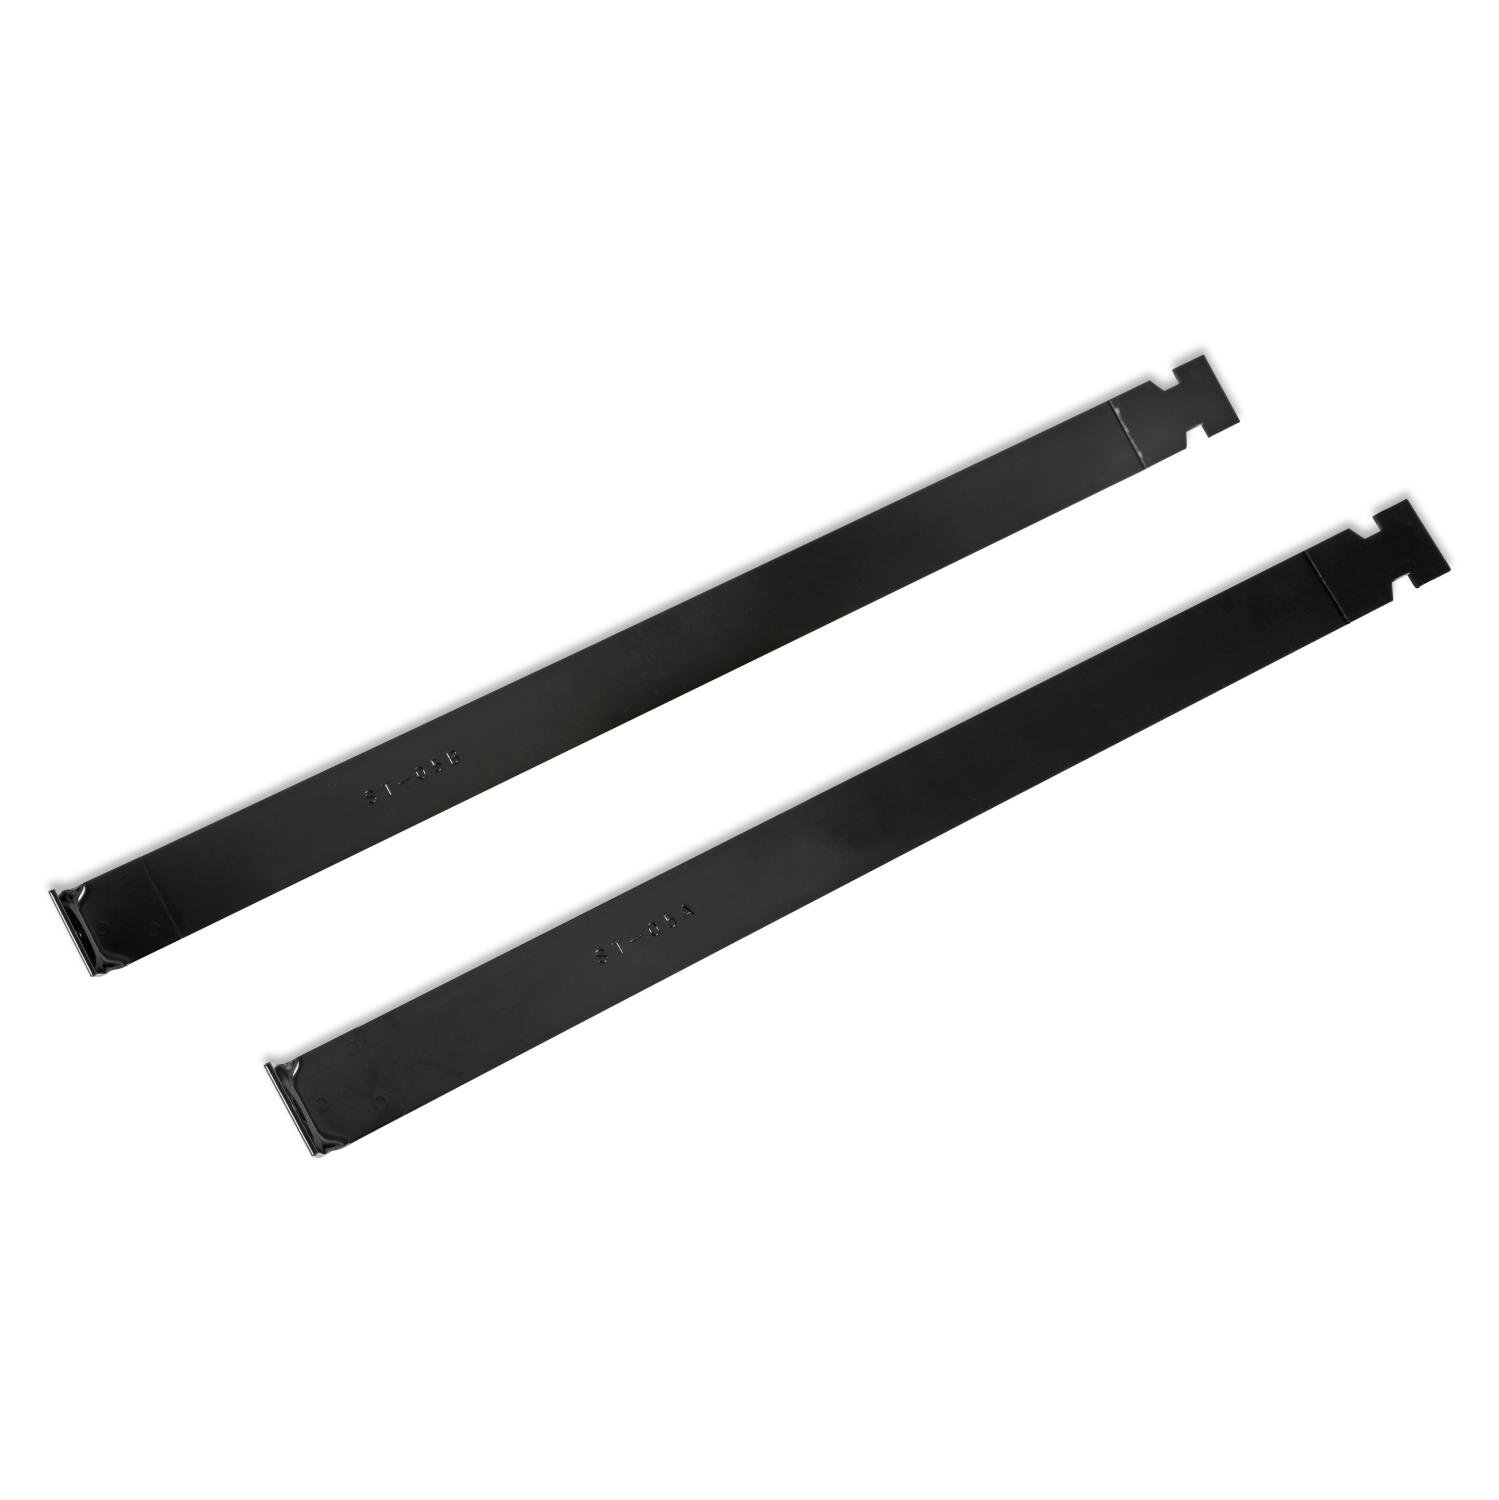 19-580 Stock Replacement Fuel Tank Straps for 1990-1997